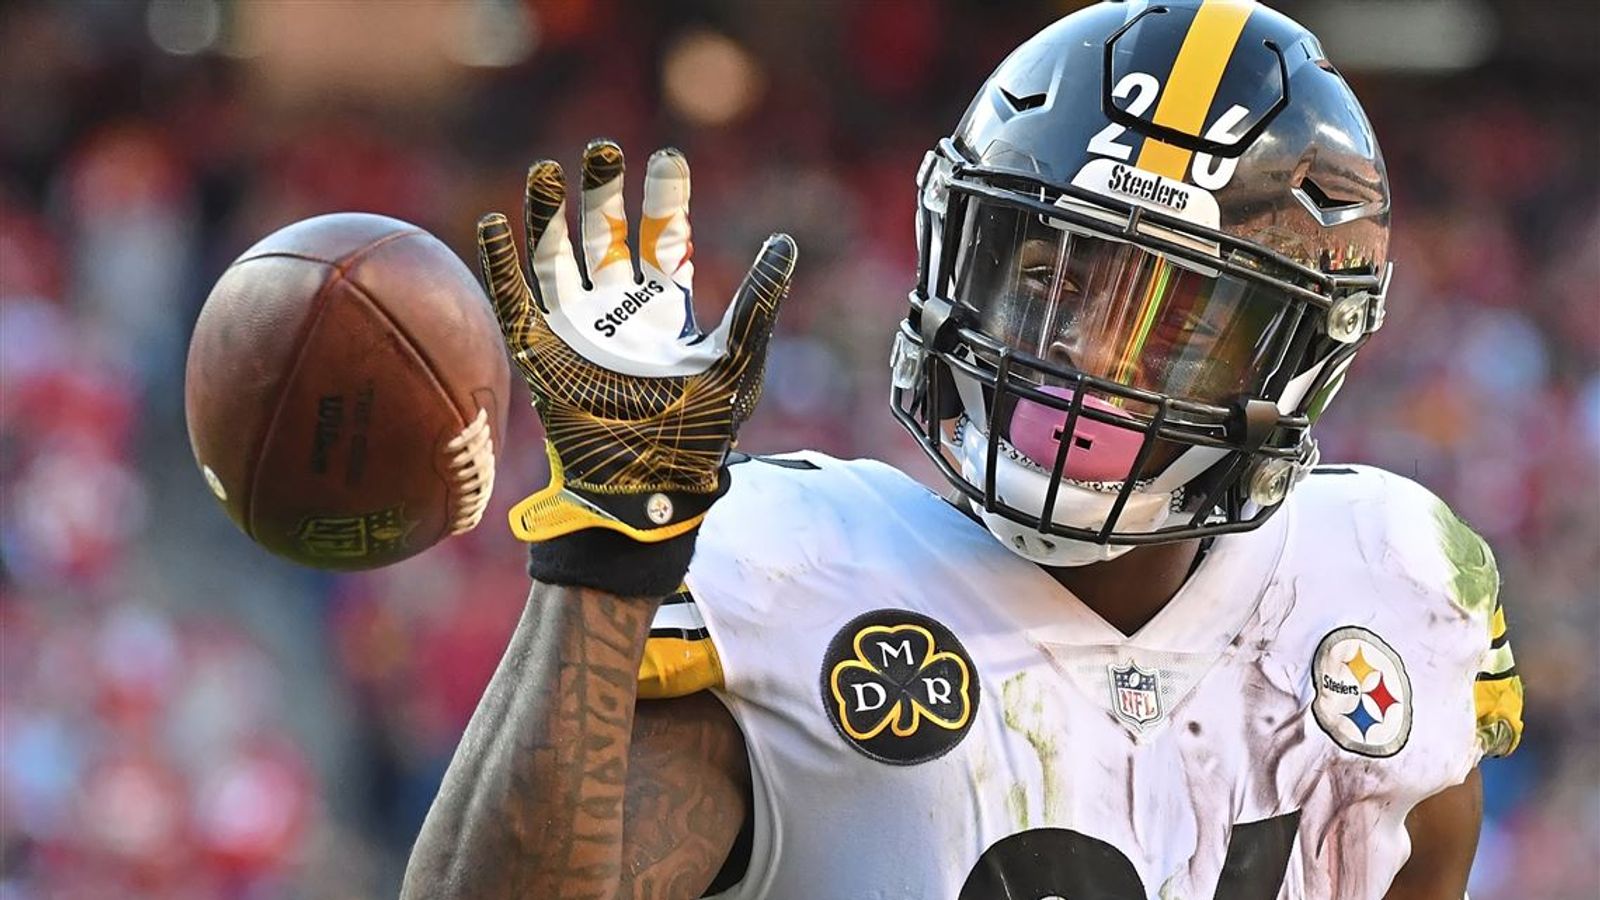 Le'Veon Bell Reveals Steelers Great Ben Roethlisberger Definitely Ignored  Todd Haley's Calls Yeah, Let's Ignore The Call